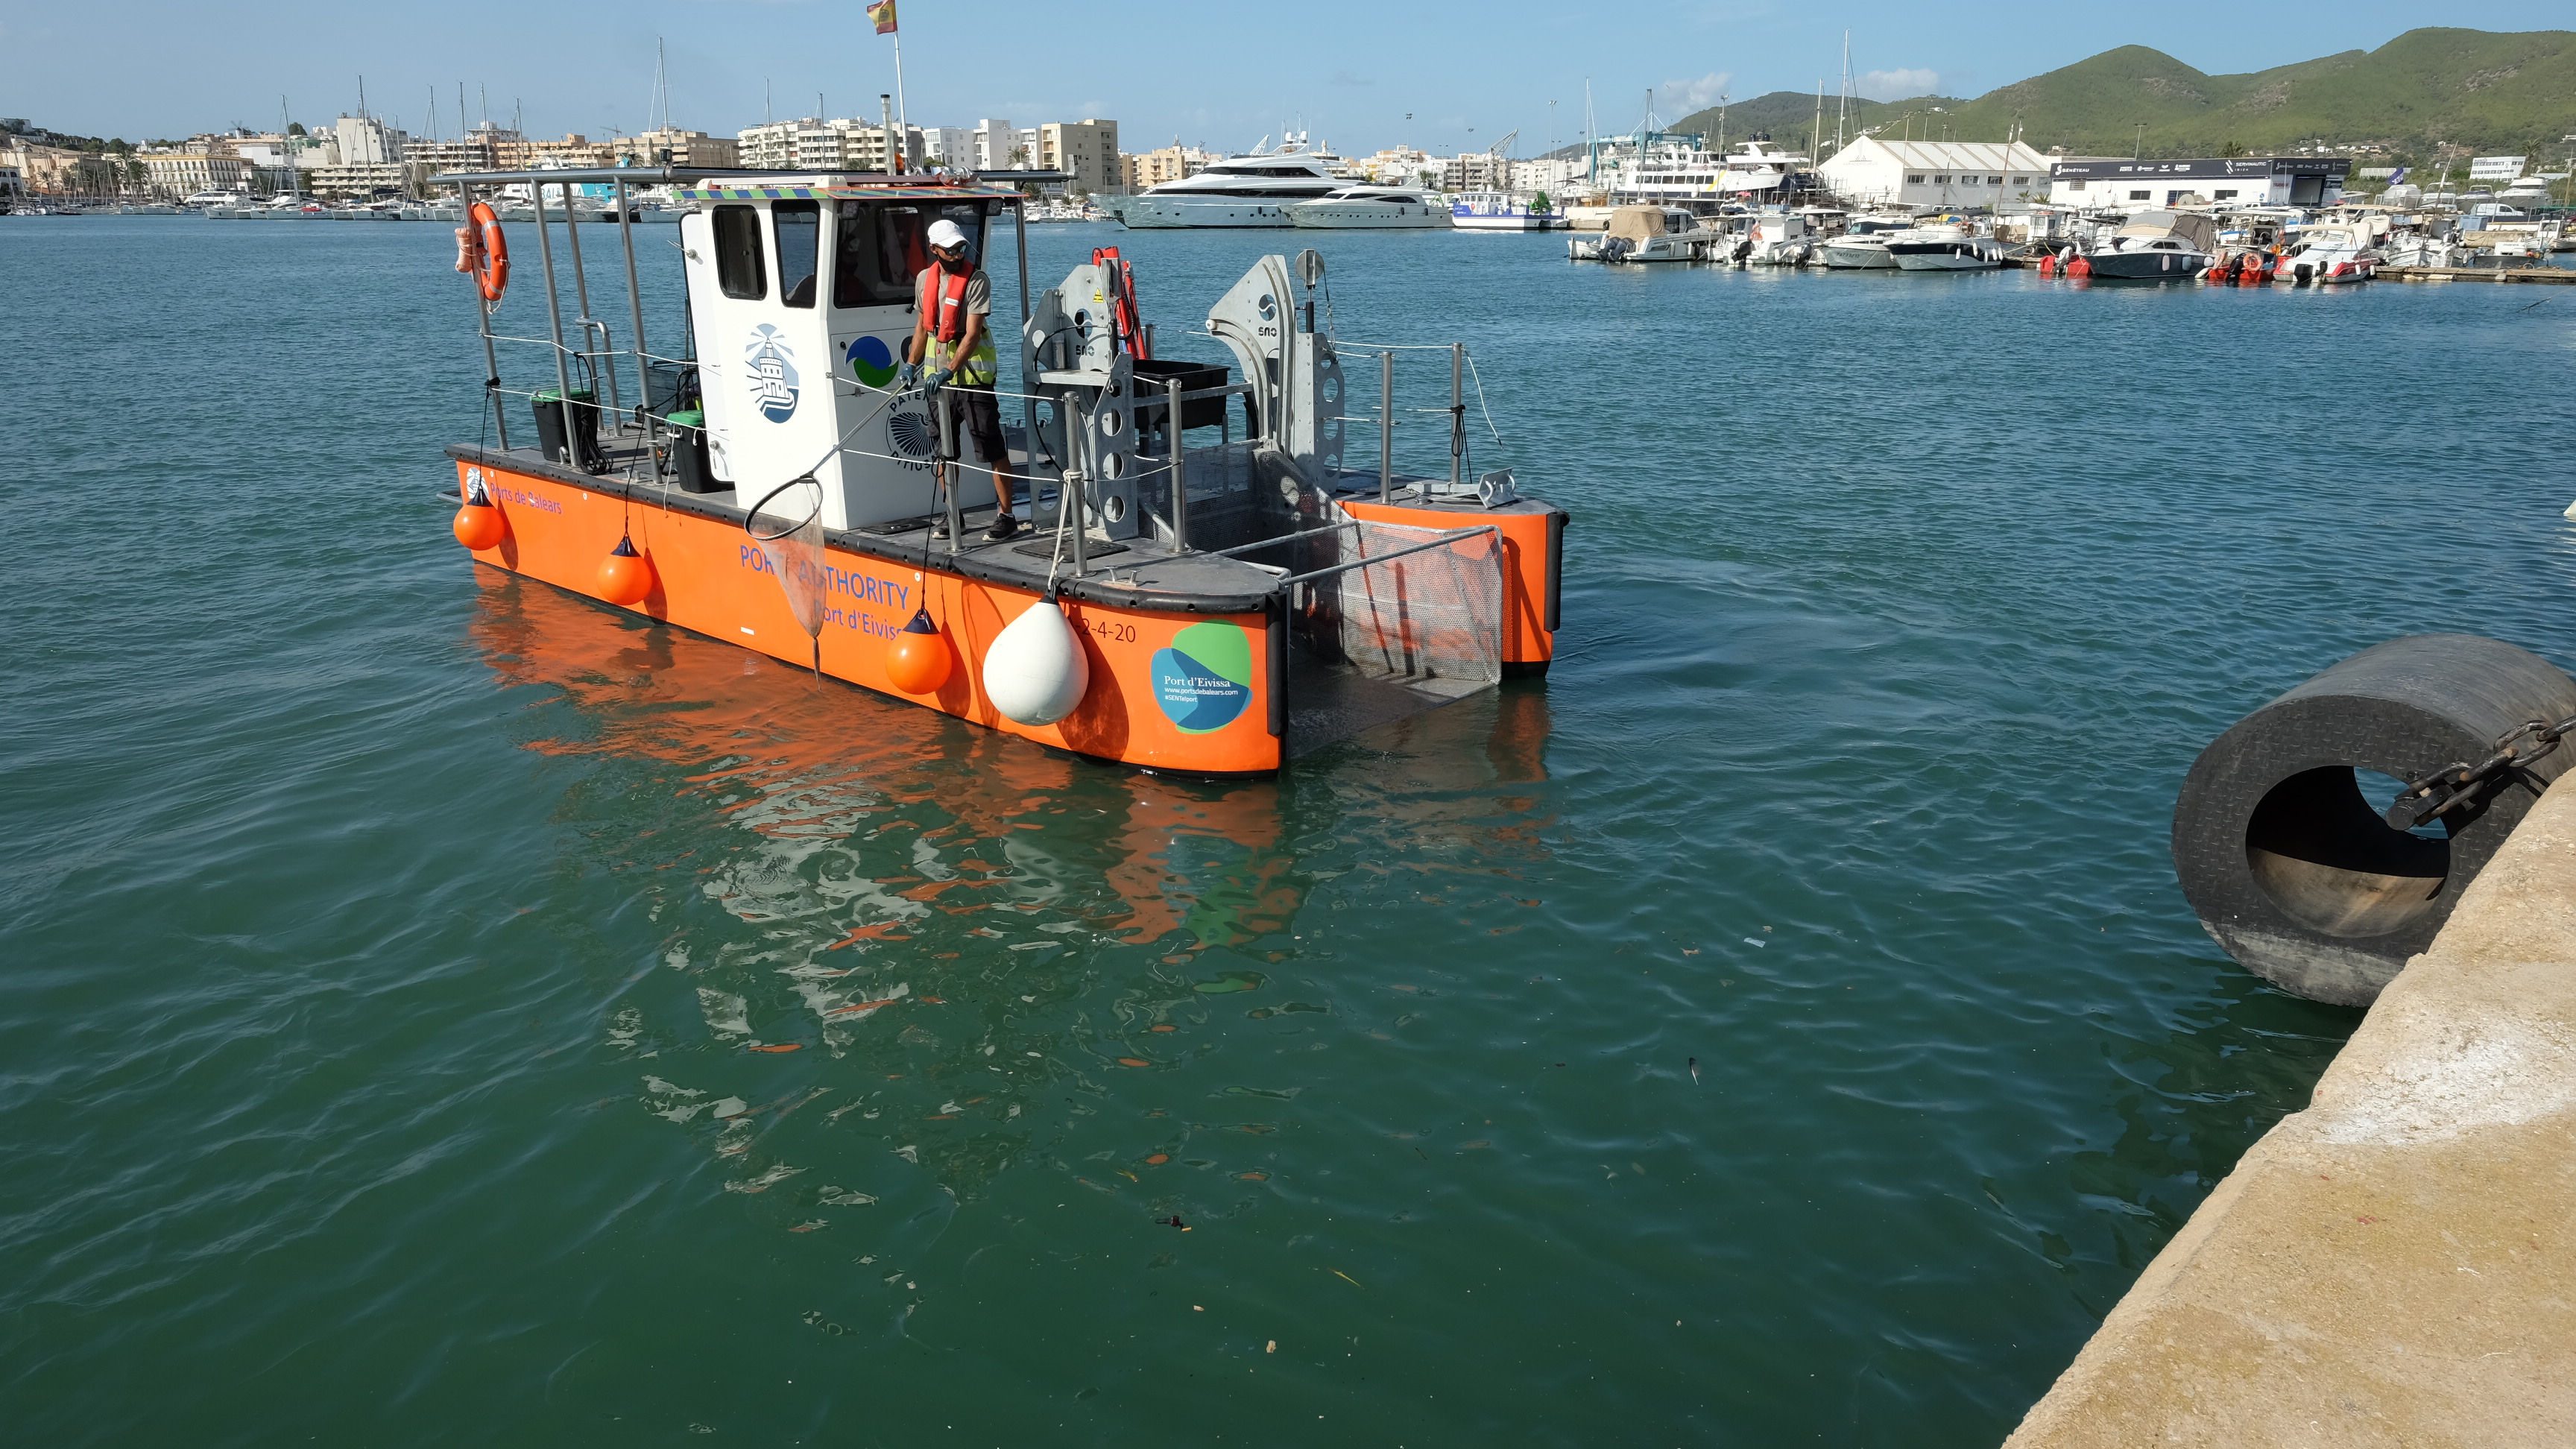 More than 8.5 tonnes of waste removed from Eivissa port waters over the last three years